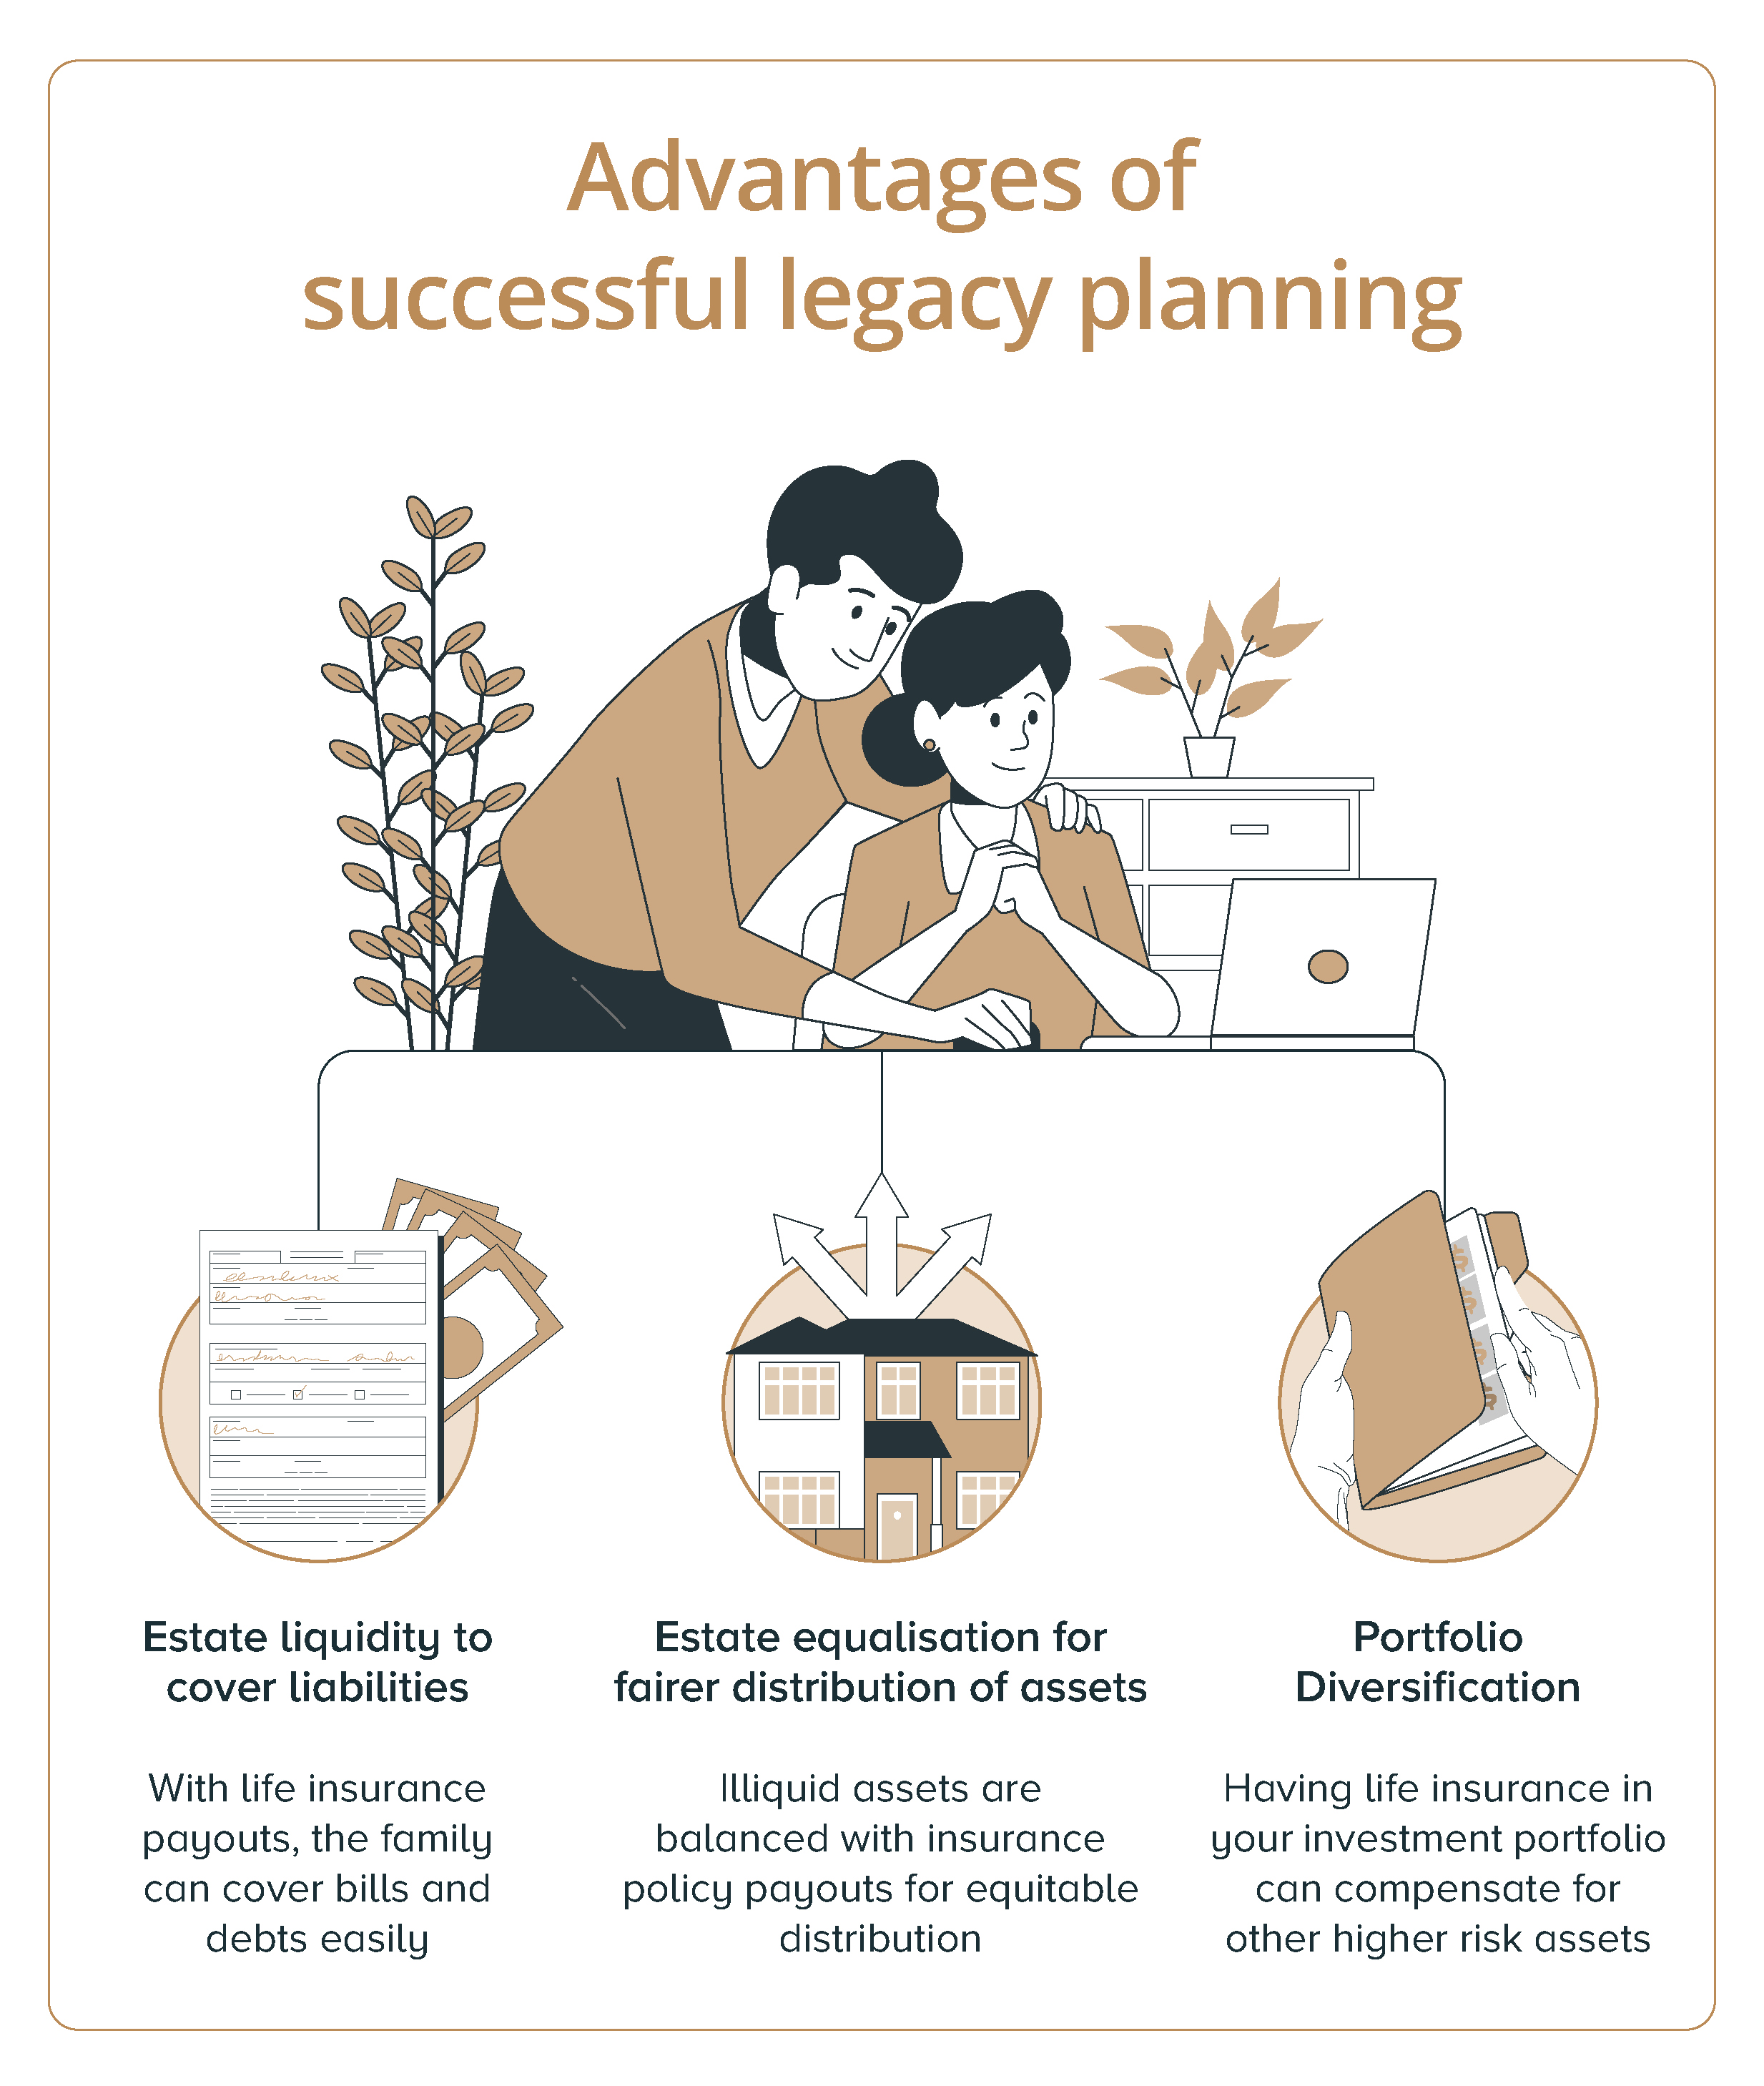 Advantages of successful legacy planning